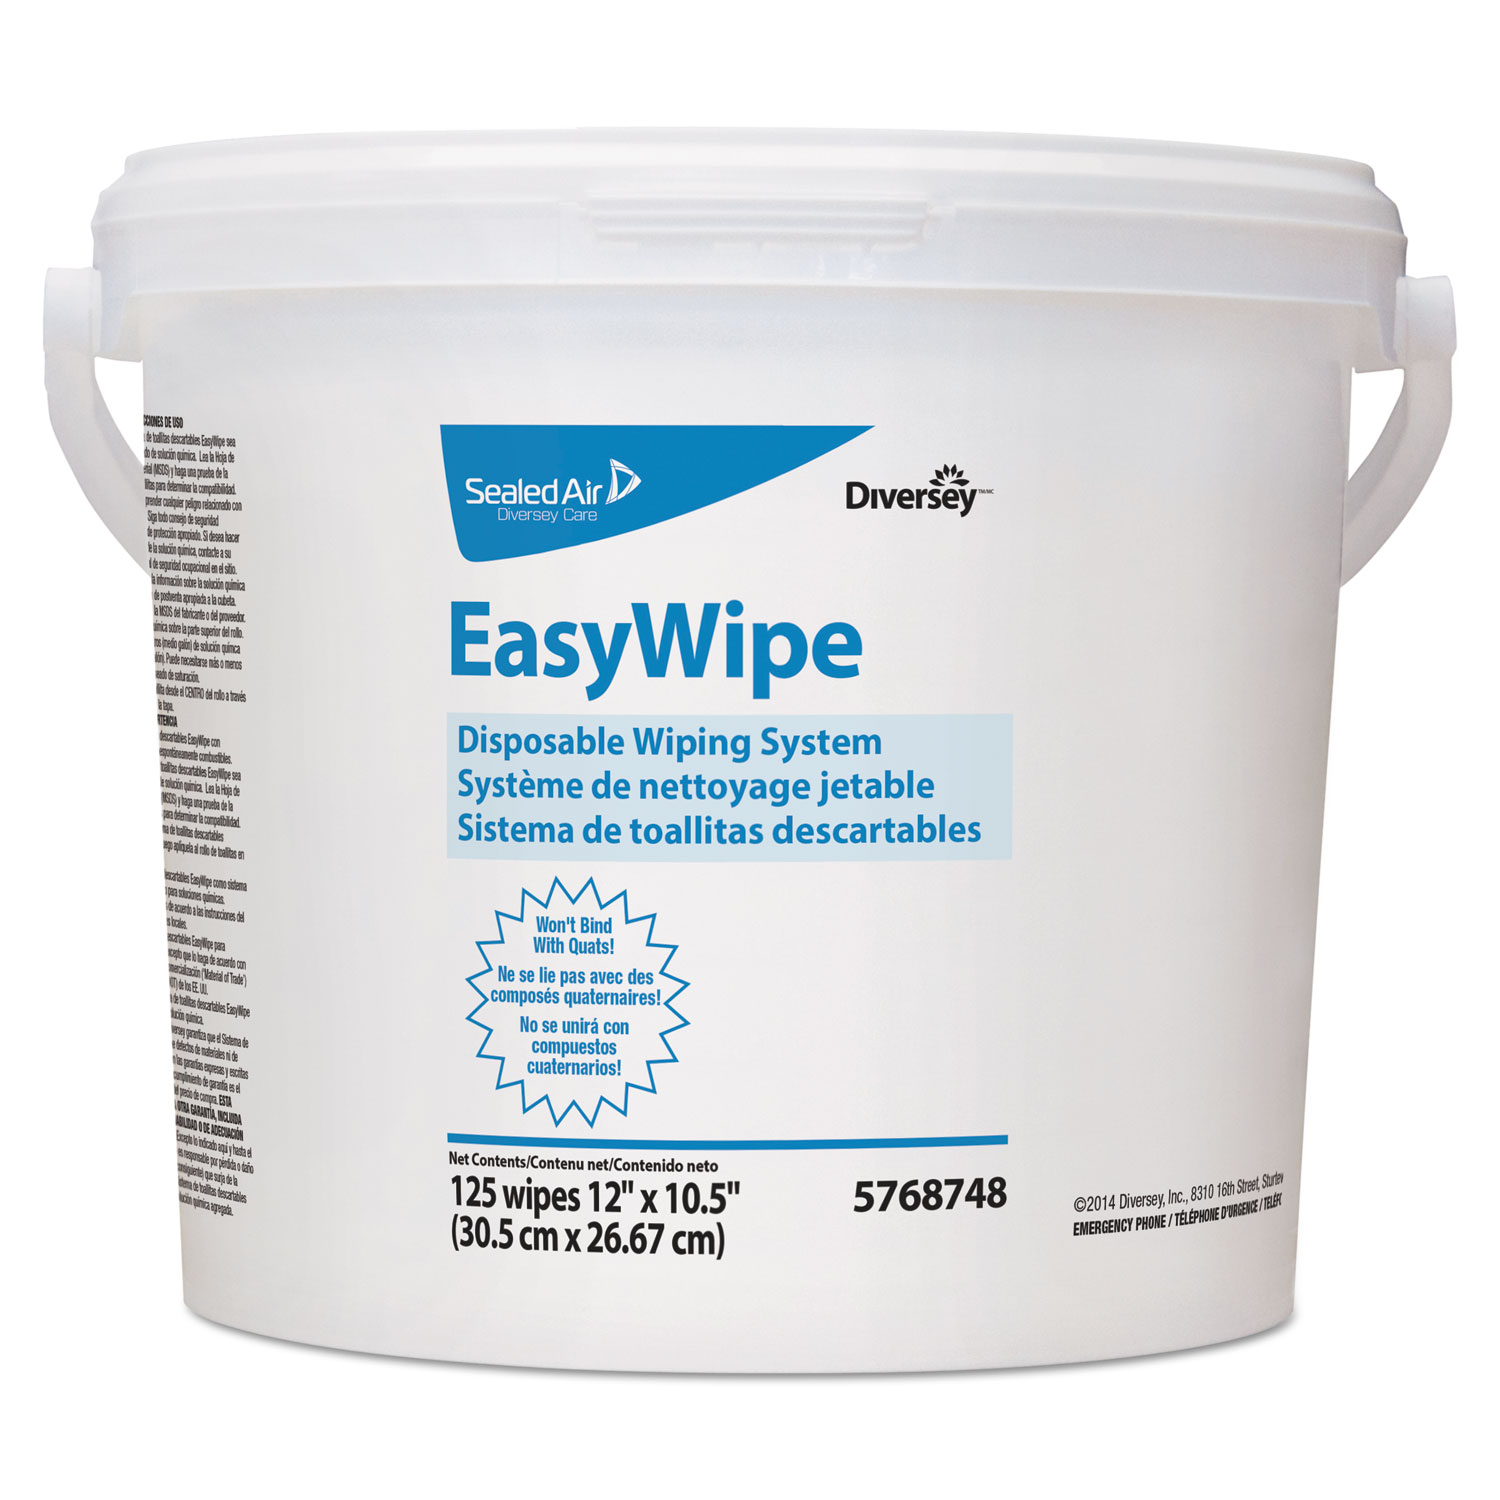  Diversey 5768748 Easywipe Disposable Wiping Refill, 8 5/8 x 24 7/8, White, 125/Bucket, 6/Carton (DVO5768748) 